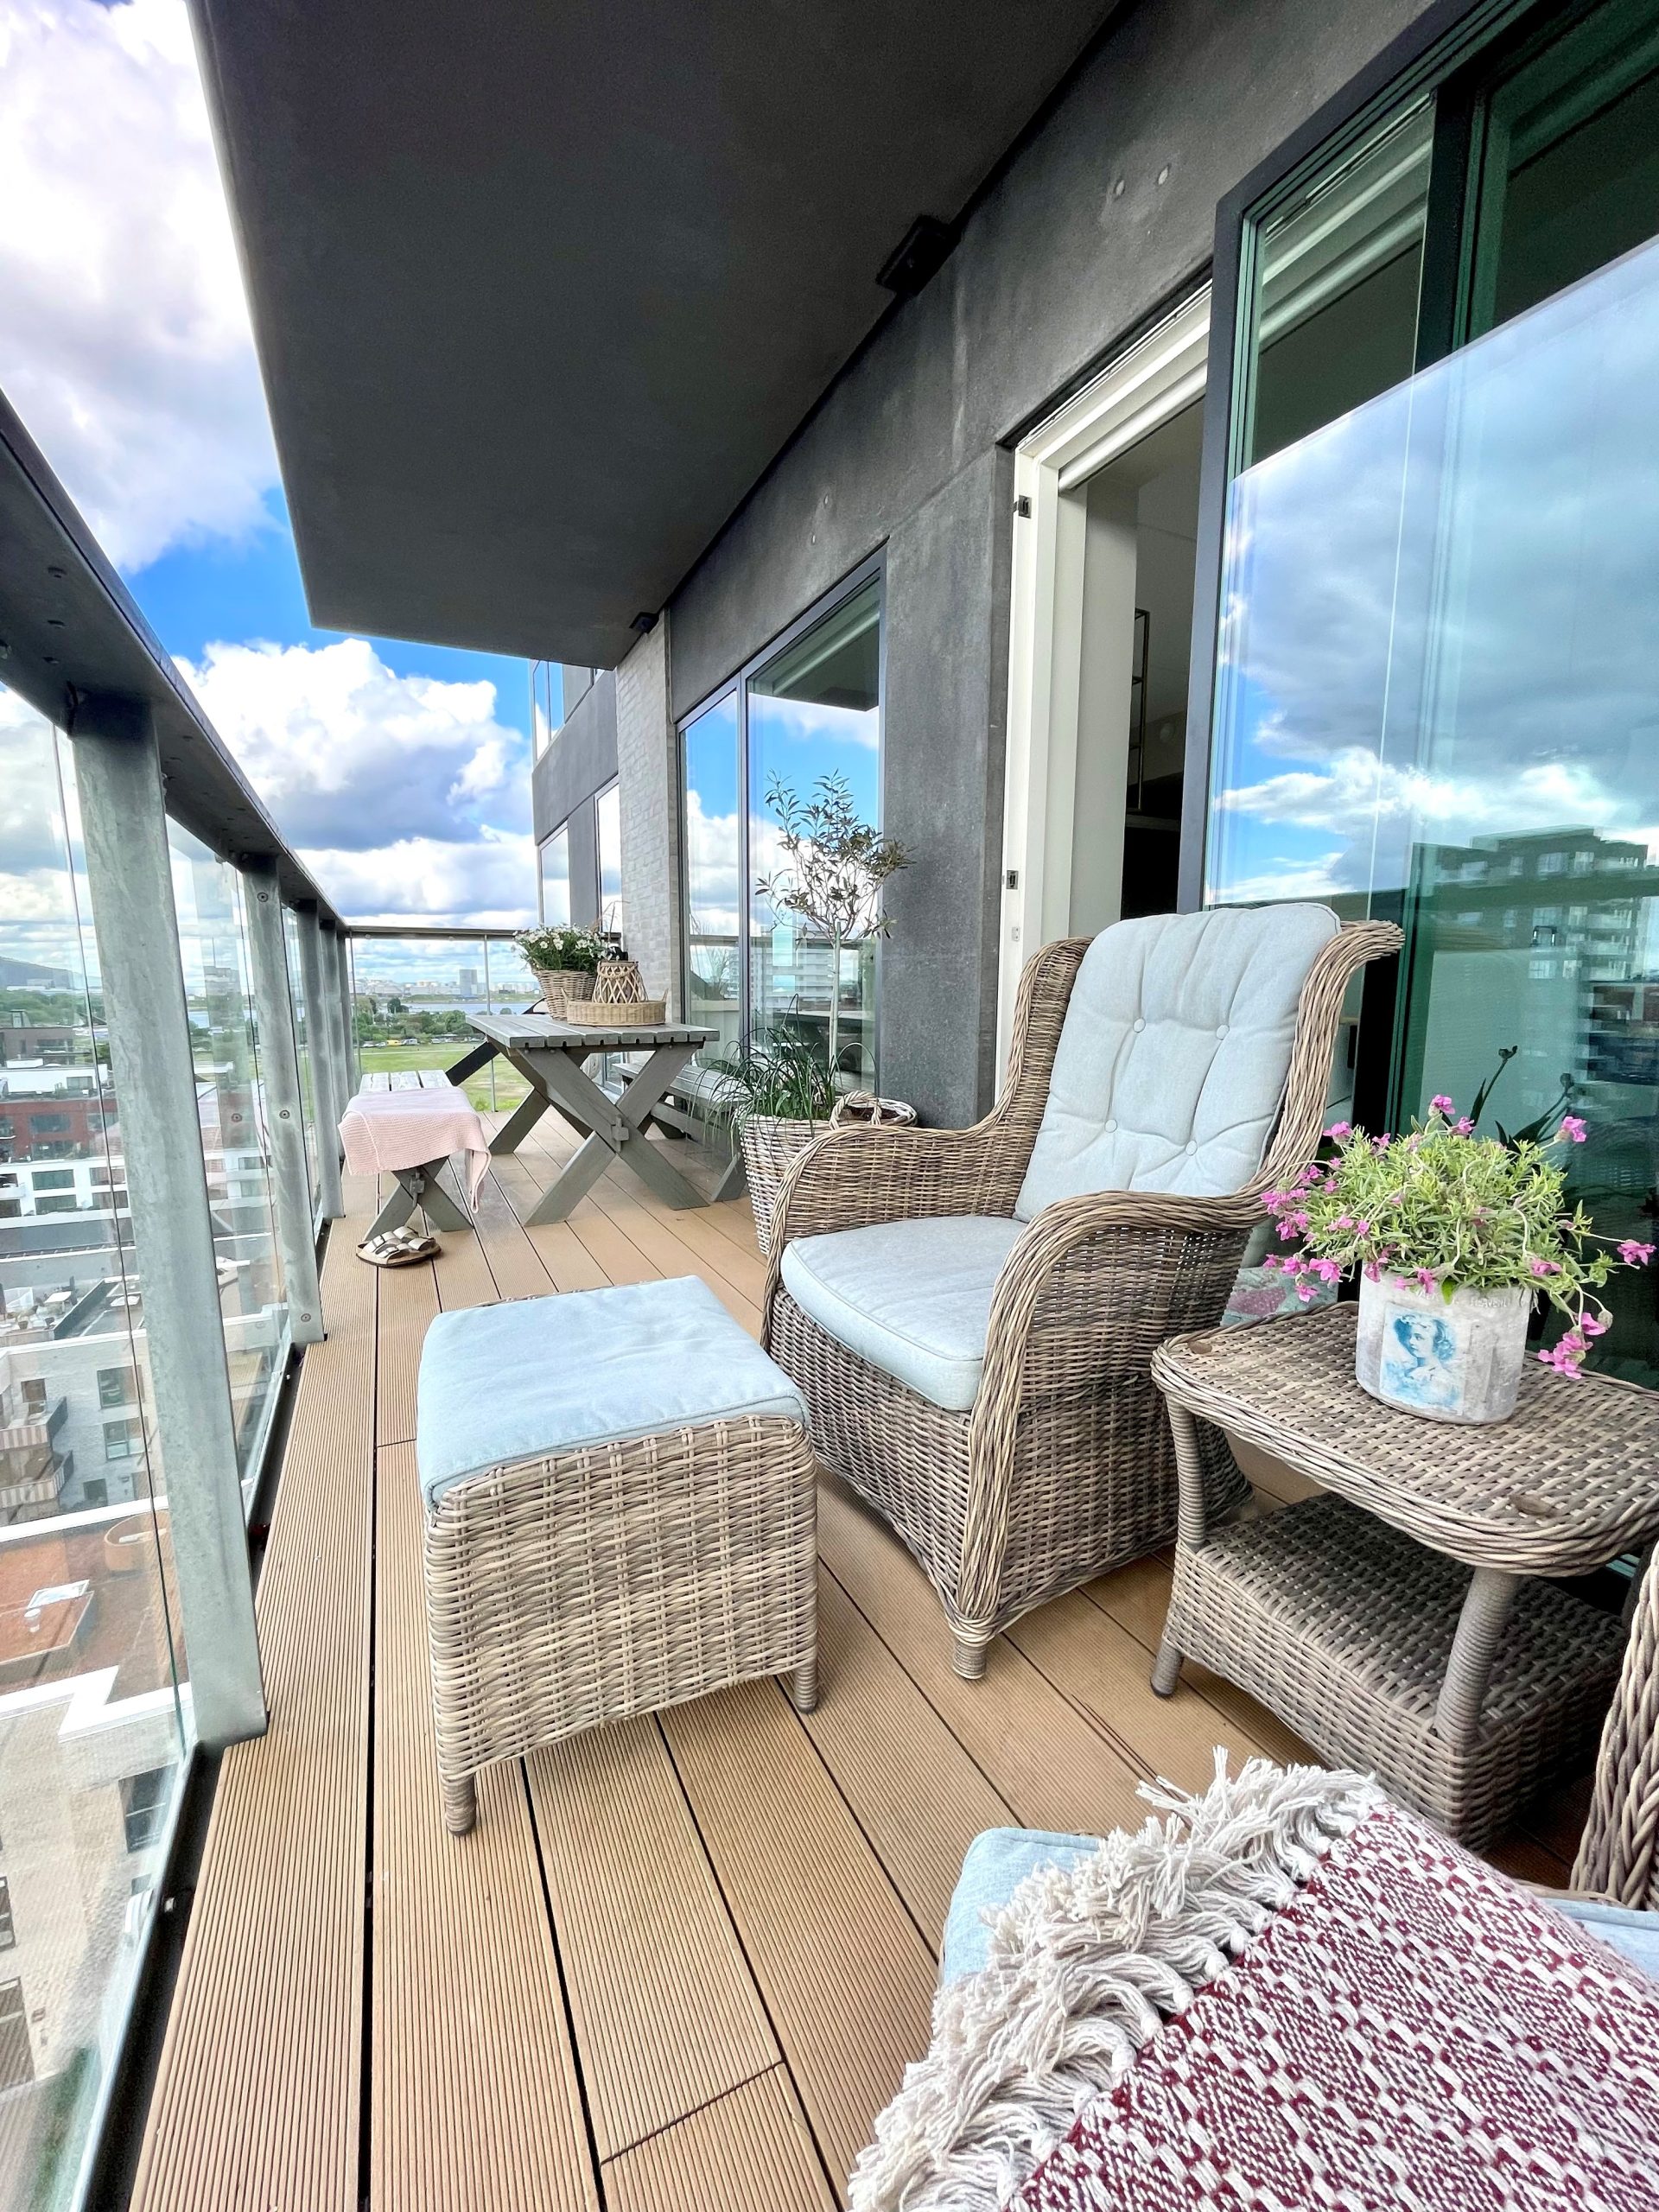 1660 – Beautiful apartment with a view and west-facing balcony